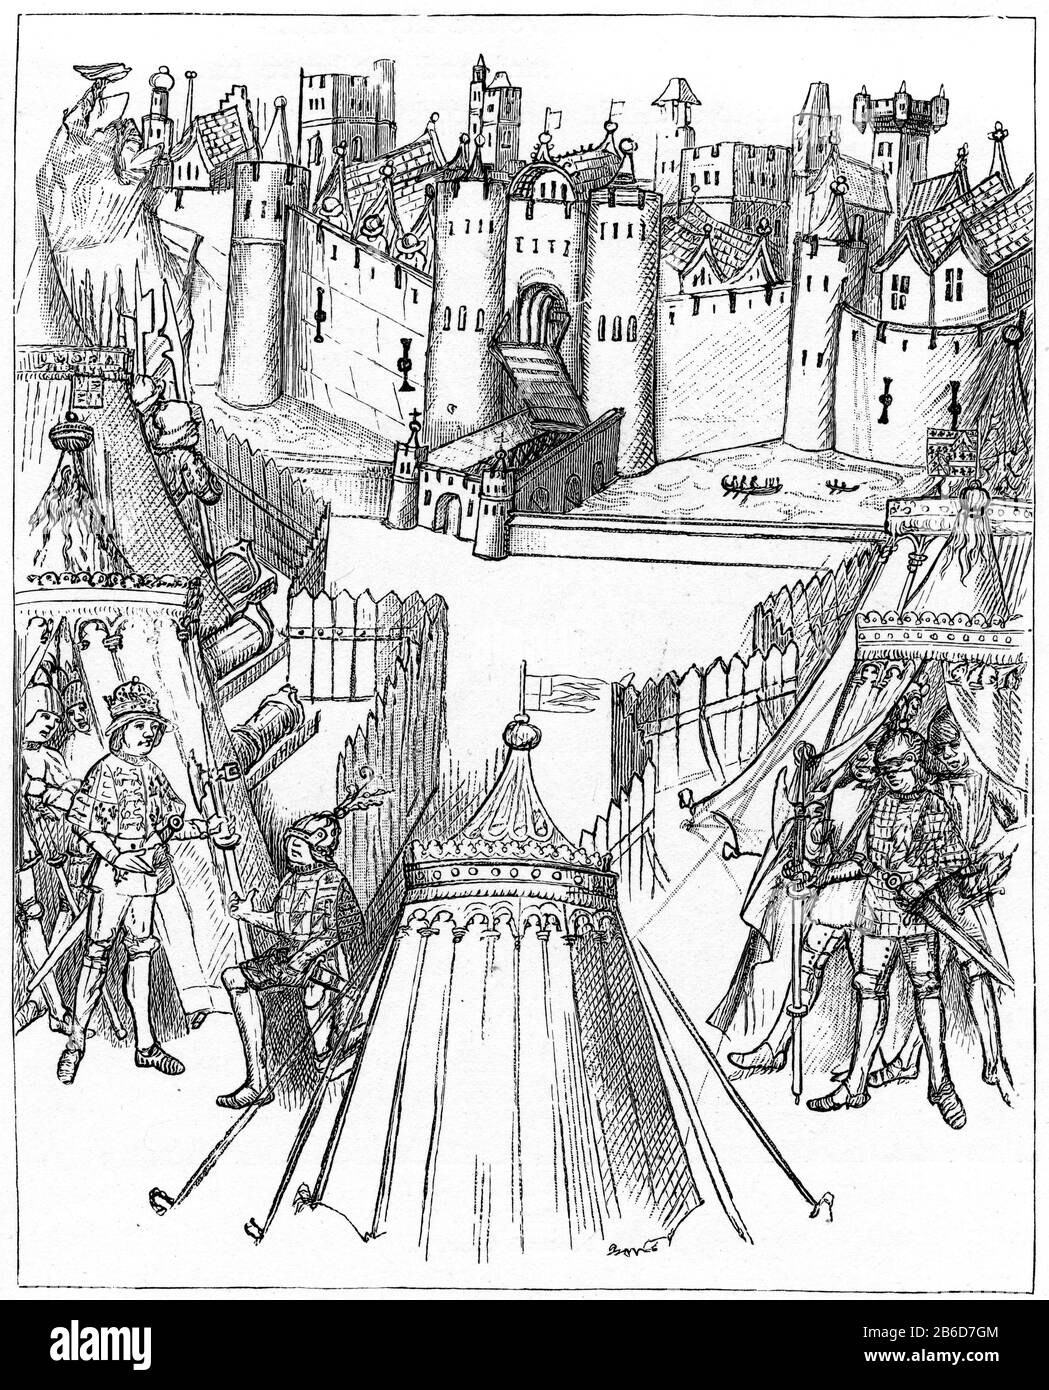 Siege of Rouen, 1418. Richard Beauchamp, Earl of Warwick (1382-1439), with Henry V (1386-1422) at the siege of Rouen, 1418. The Siege of Rouen (29 July 1418 - 19 January 1419) was a major event in the Hundred Years' War, where English forces loyal to Henry V captured Rouen, the capital of Normandy, from the Norman French. From The Beauchamp Pageants c1485. Stock Photo